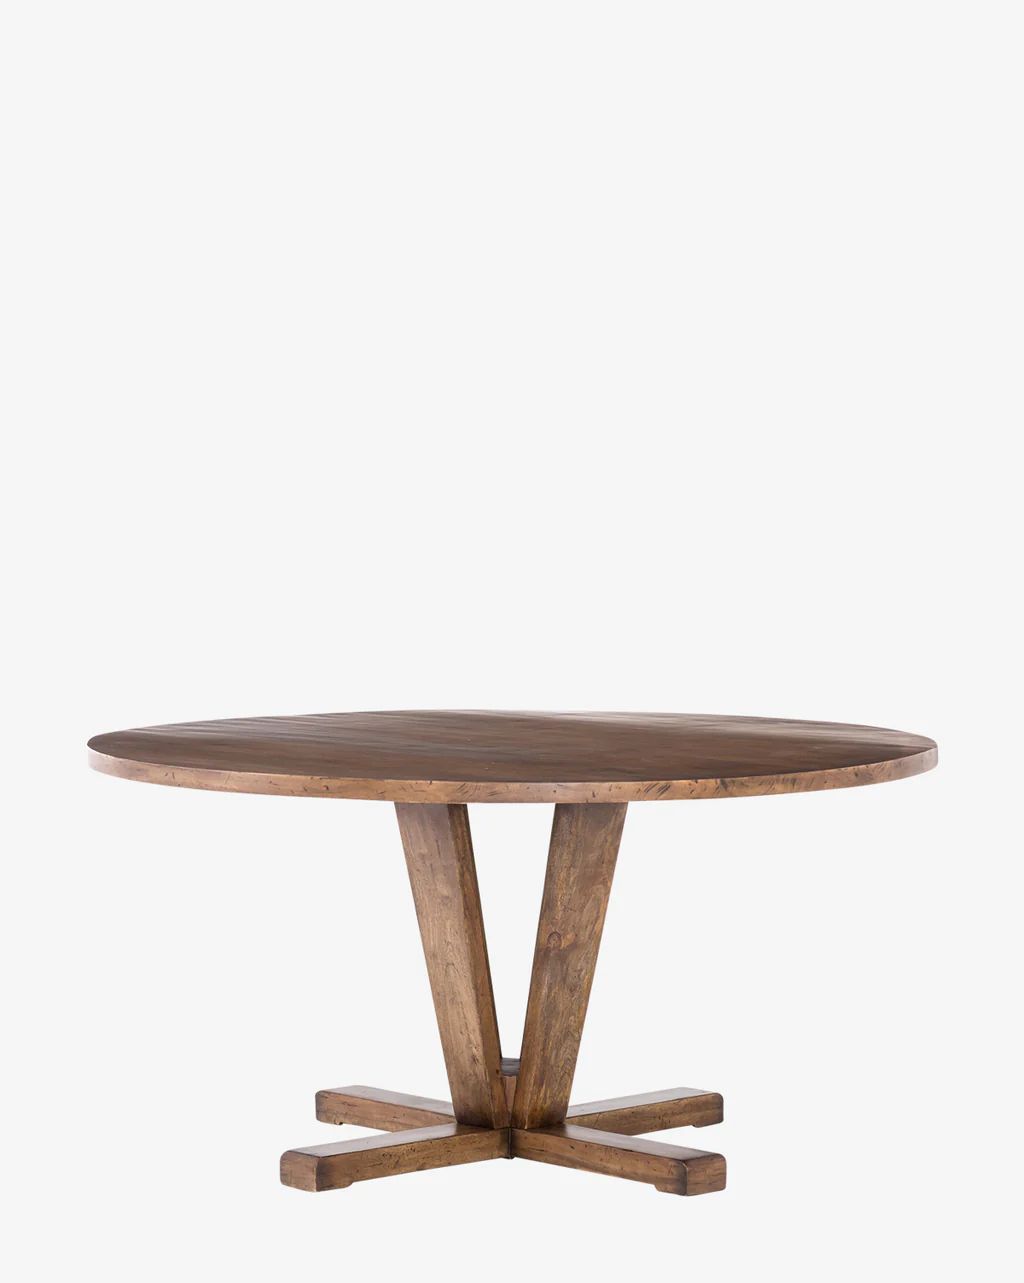 Mia Dining Table | McGee & Co.